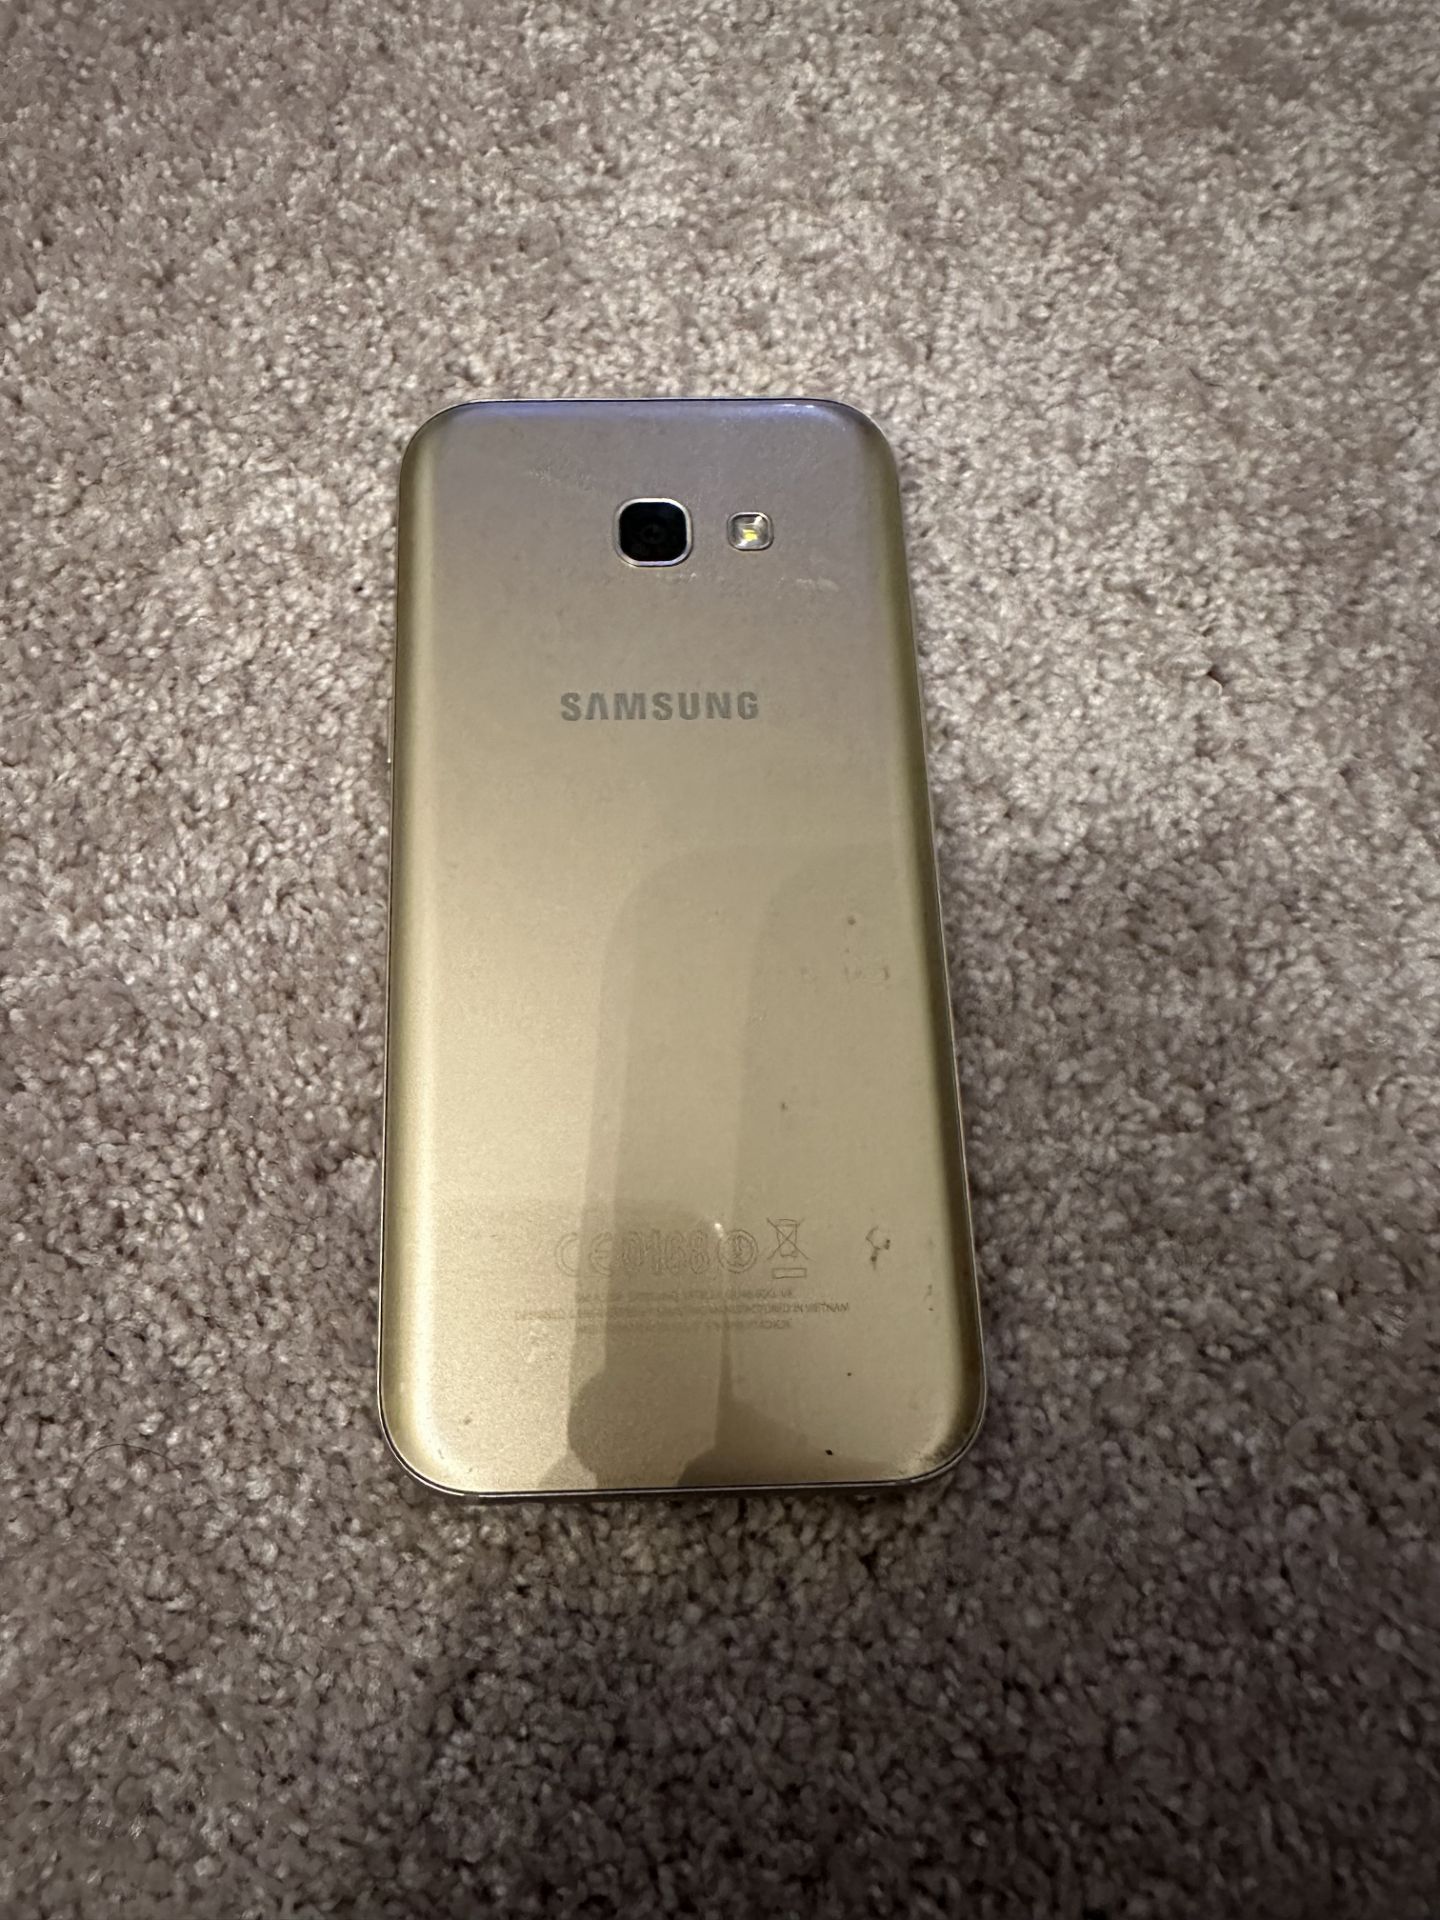 Samsung A5 Gold - Untested - Image 2 of 2